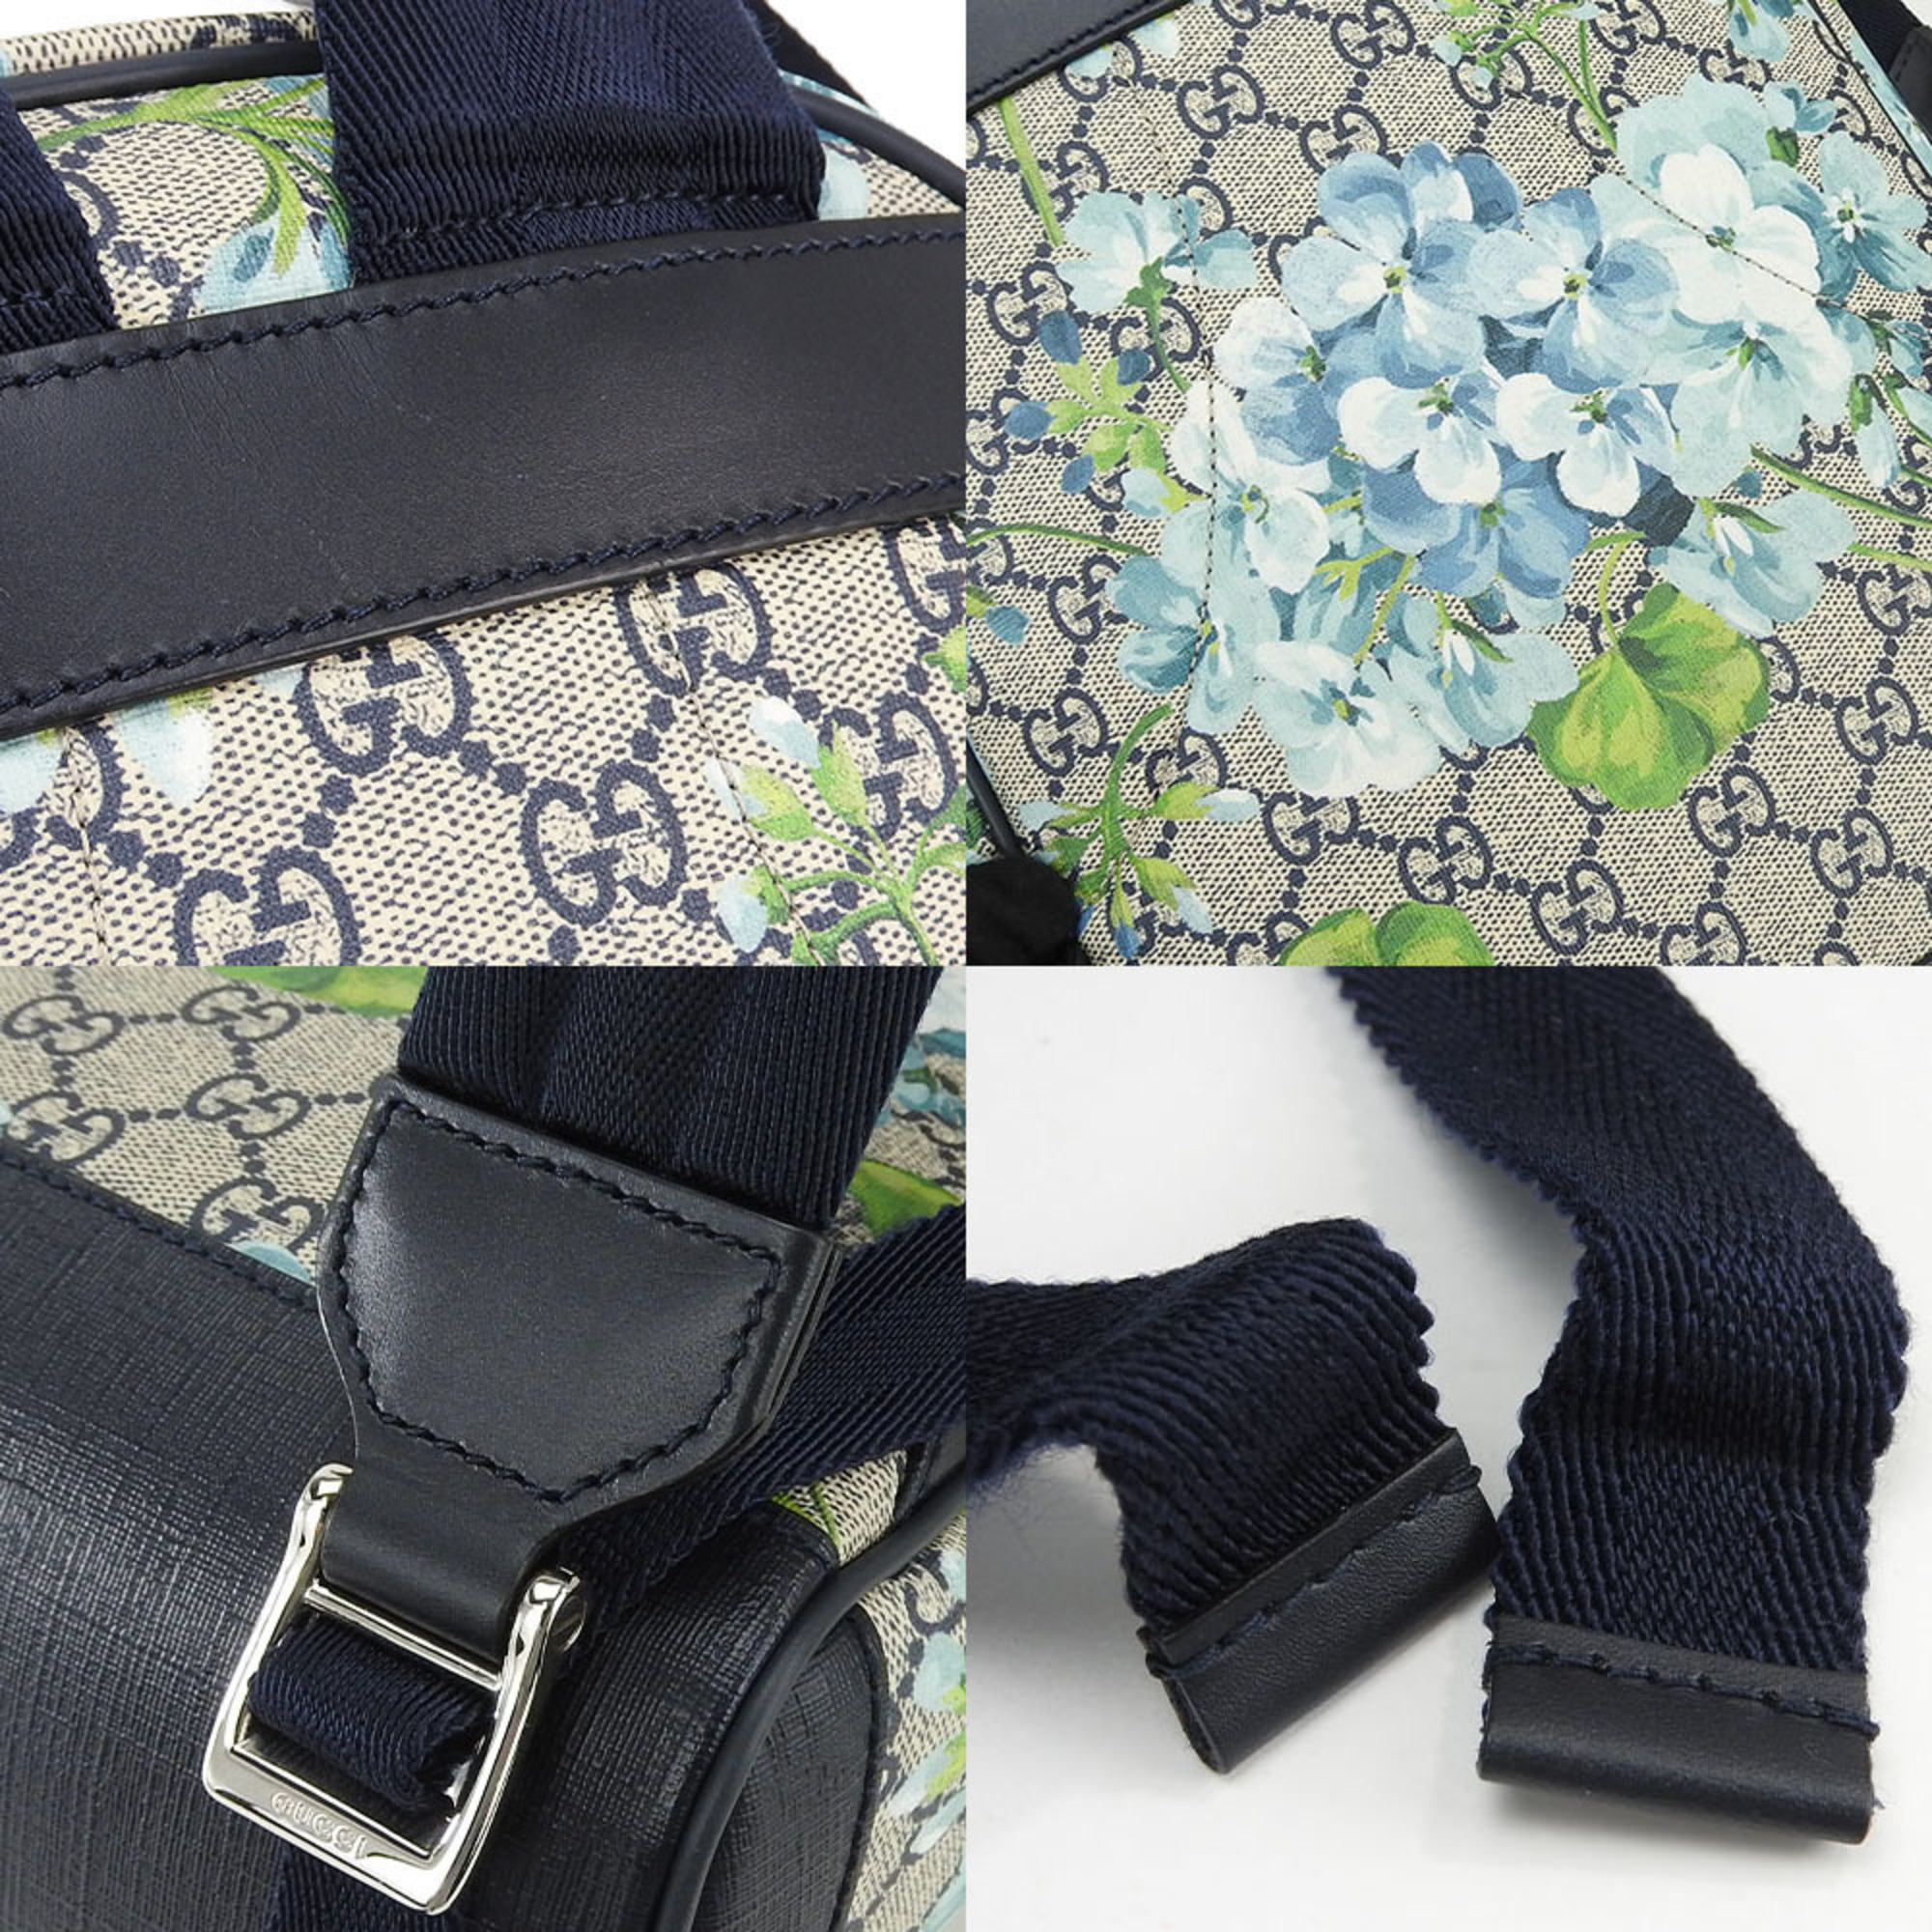 Gucci backpack rucksack 546327 GG blooms pattern leather beige navy blue GUCCI flour pvc